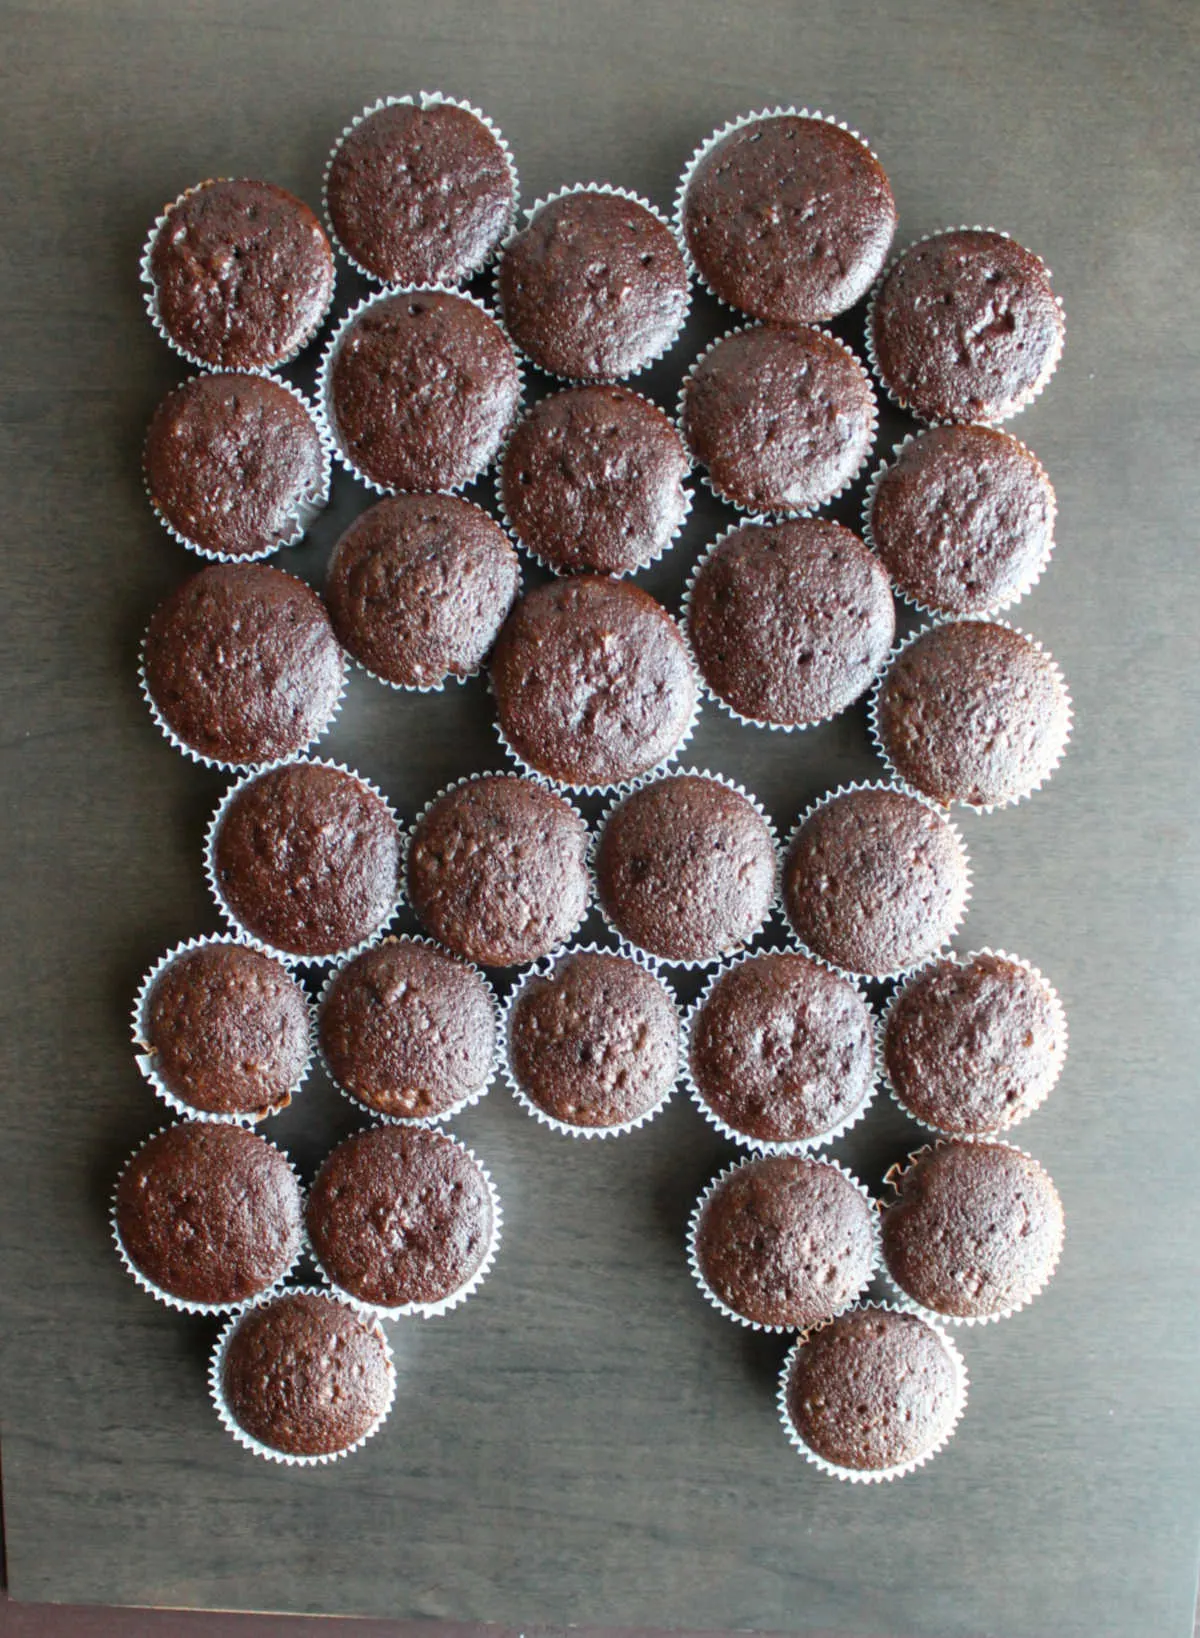 chocolate cupcakes arranged in tooth pattern.